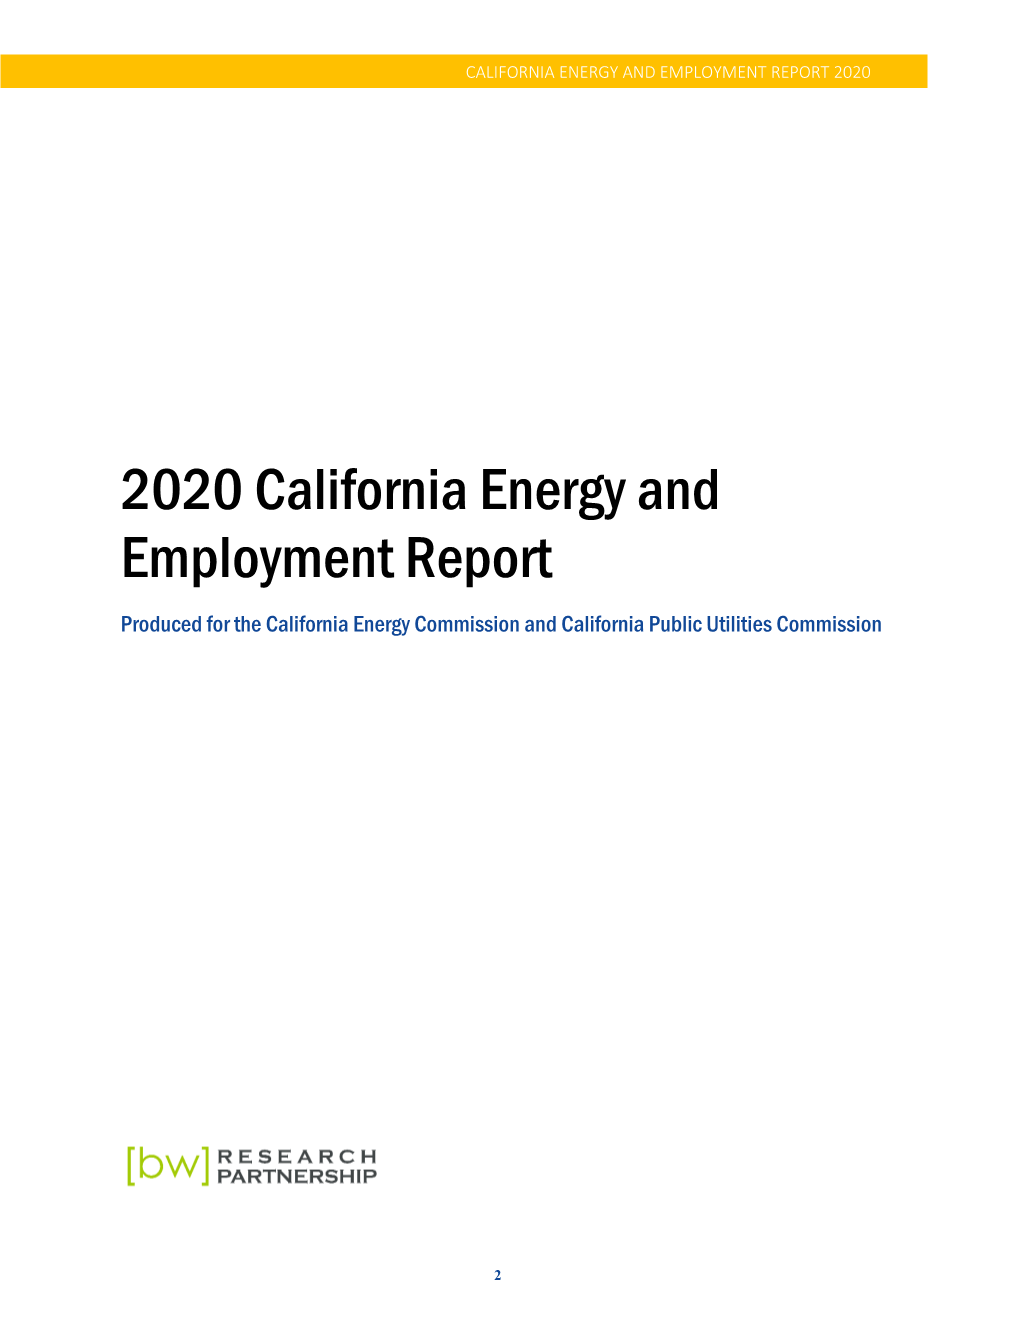 2020 California Energy and Employment Report